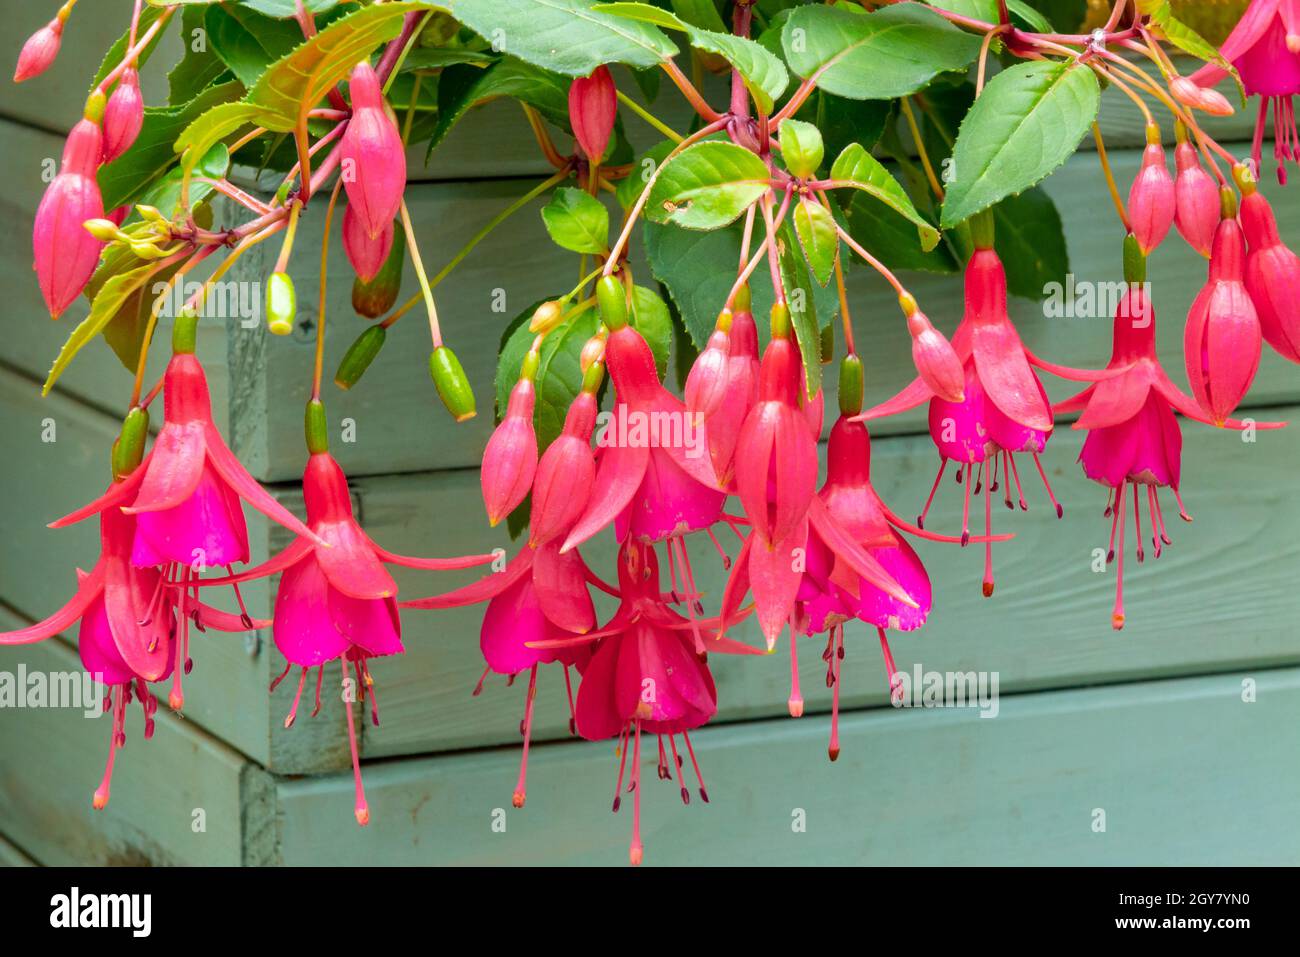 Close up view of bright red fuchsia flowers in summer bloom growing in a wooden planter. Stock Photo